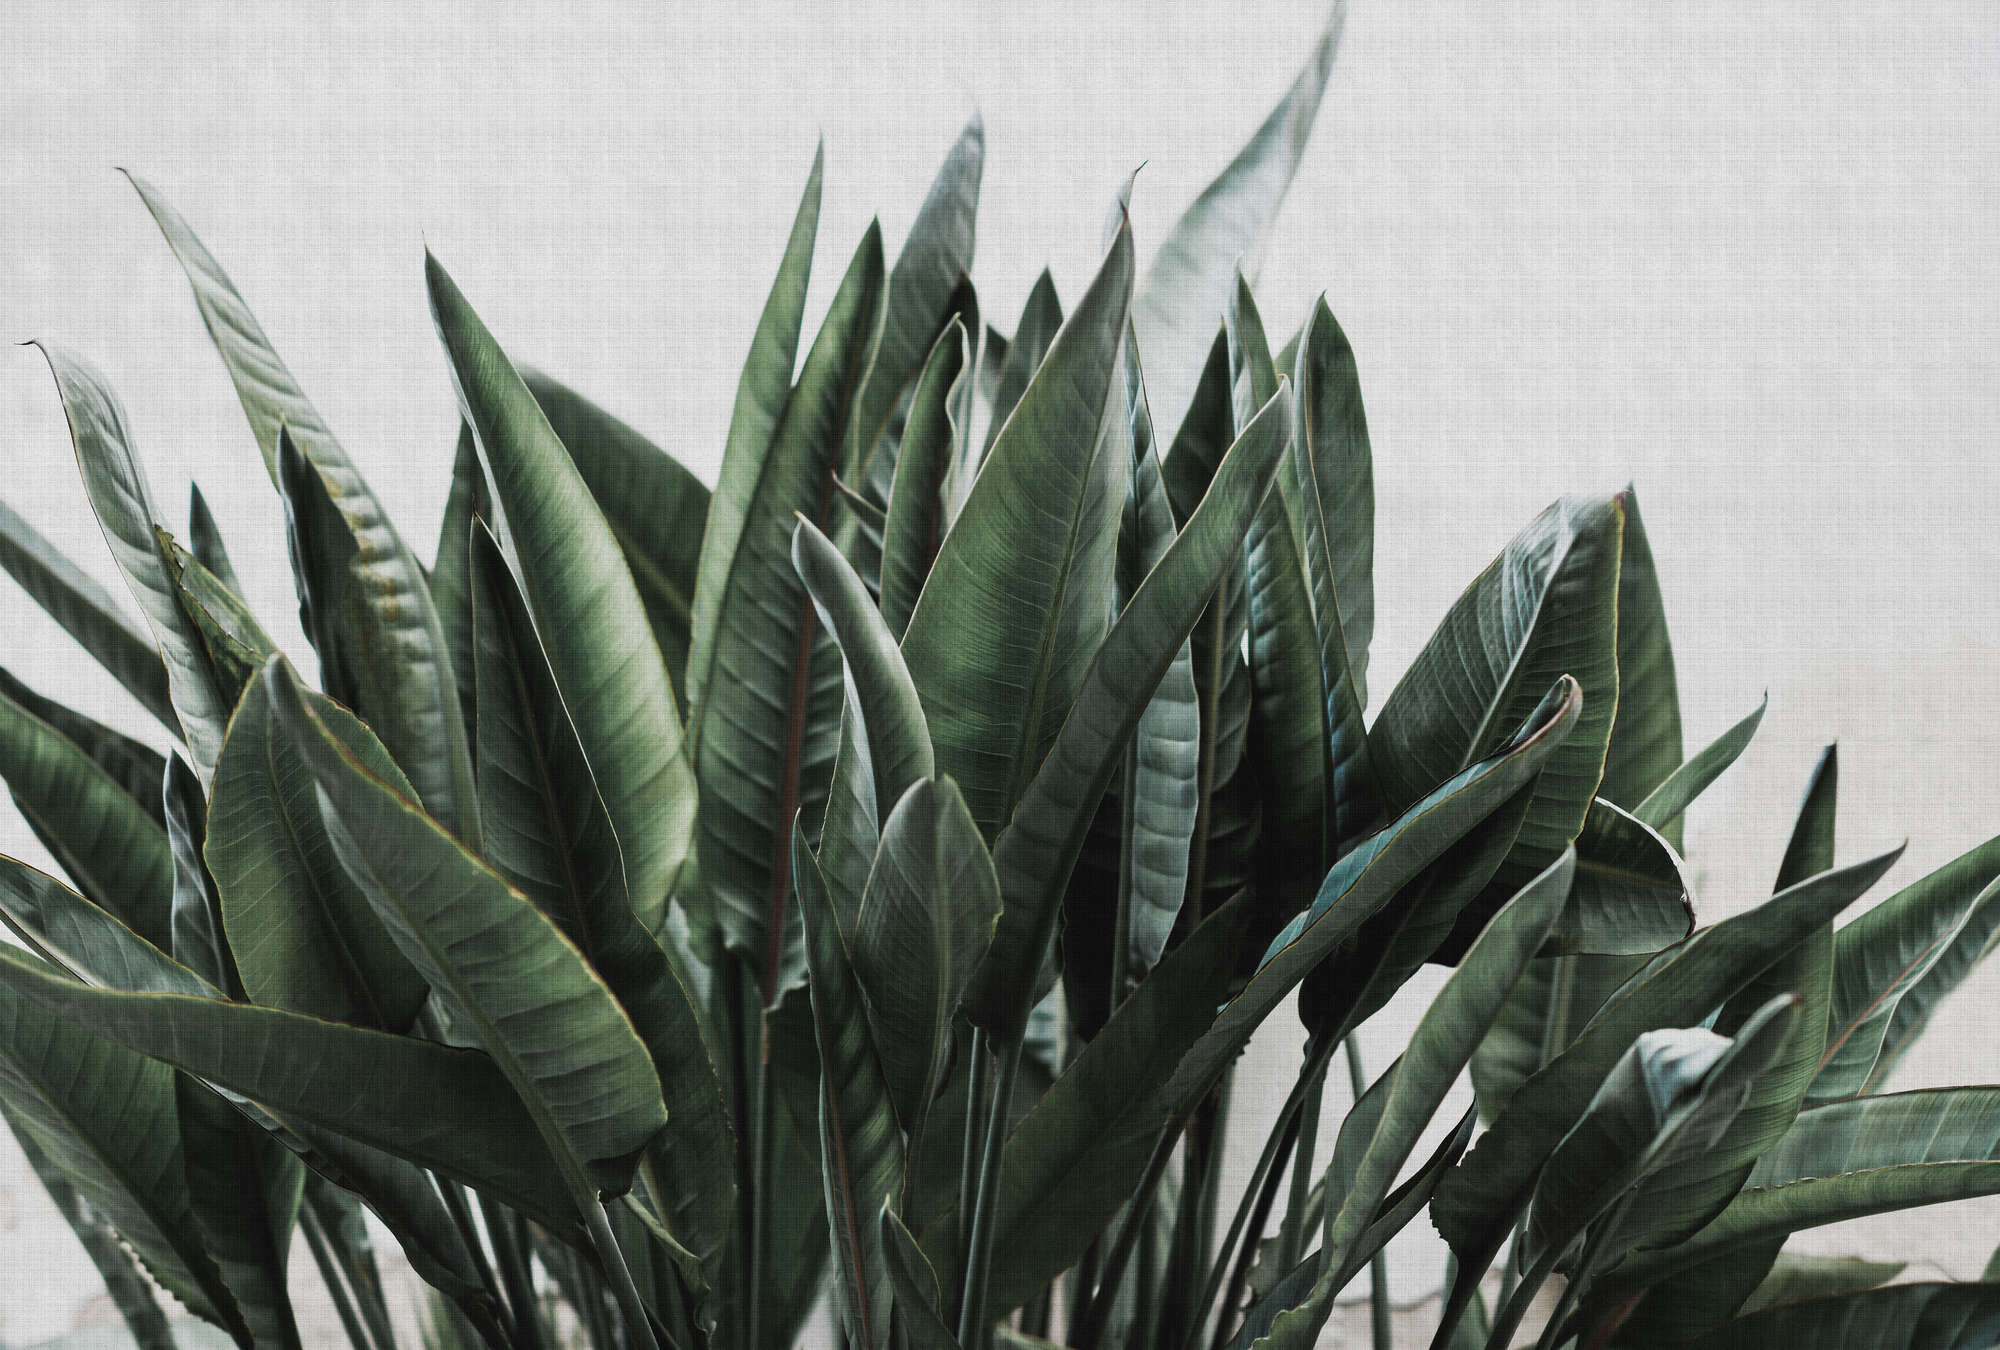             Urban jungle 2 - palm leaves mural, natural linen structure exotic plants - grey, green | premium smooth fleece
        